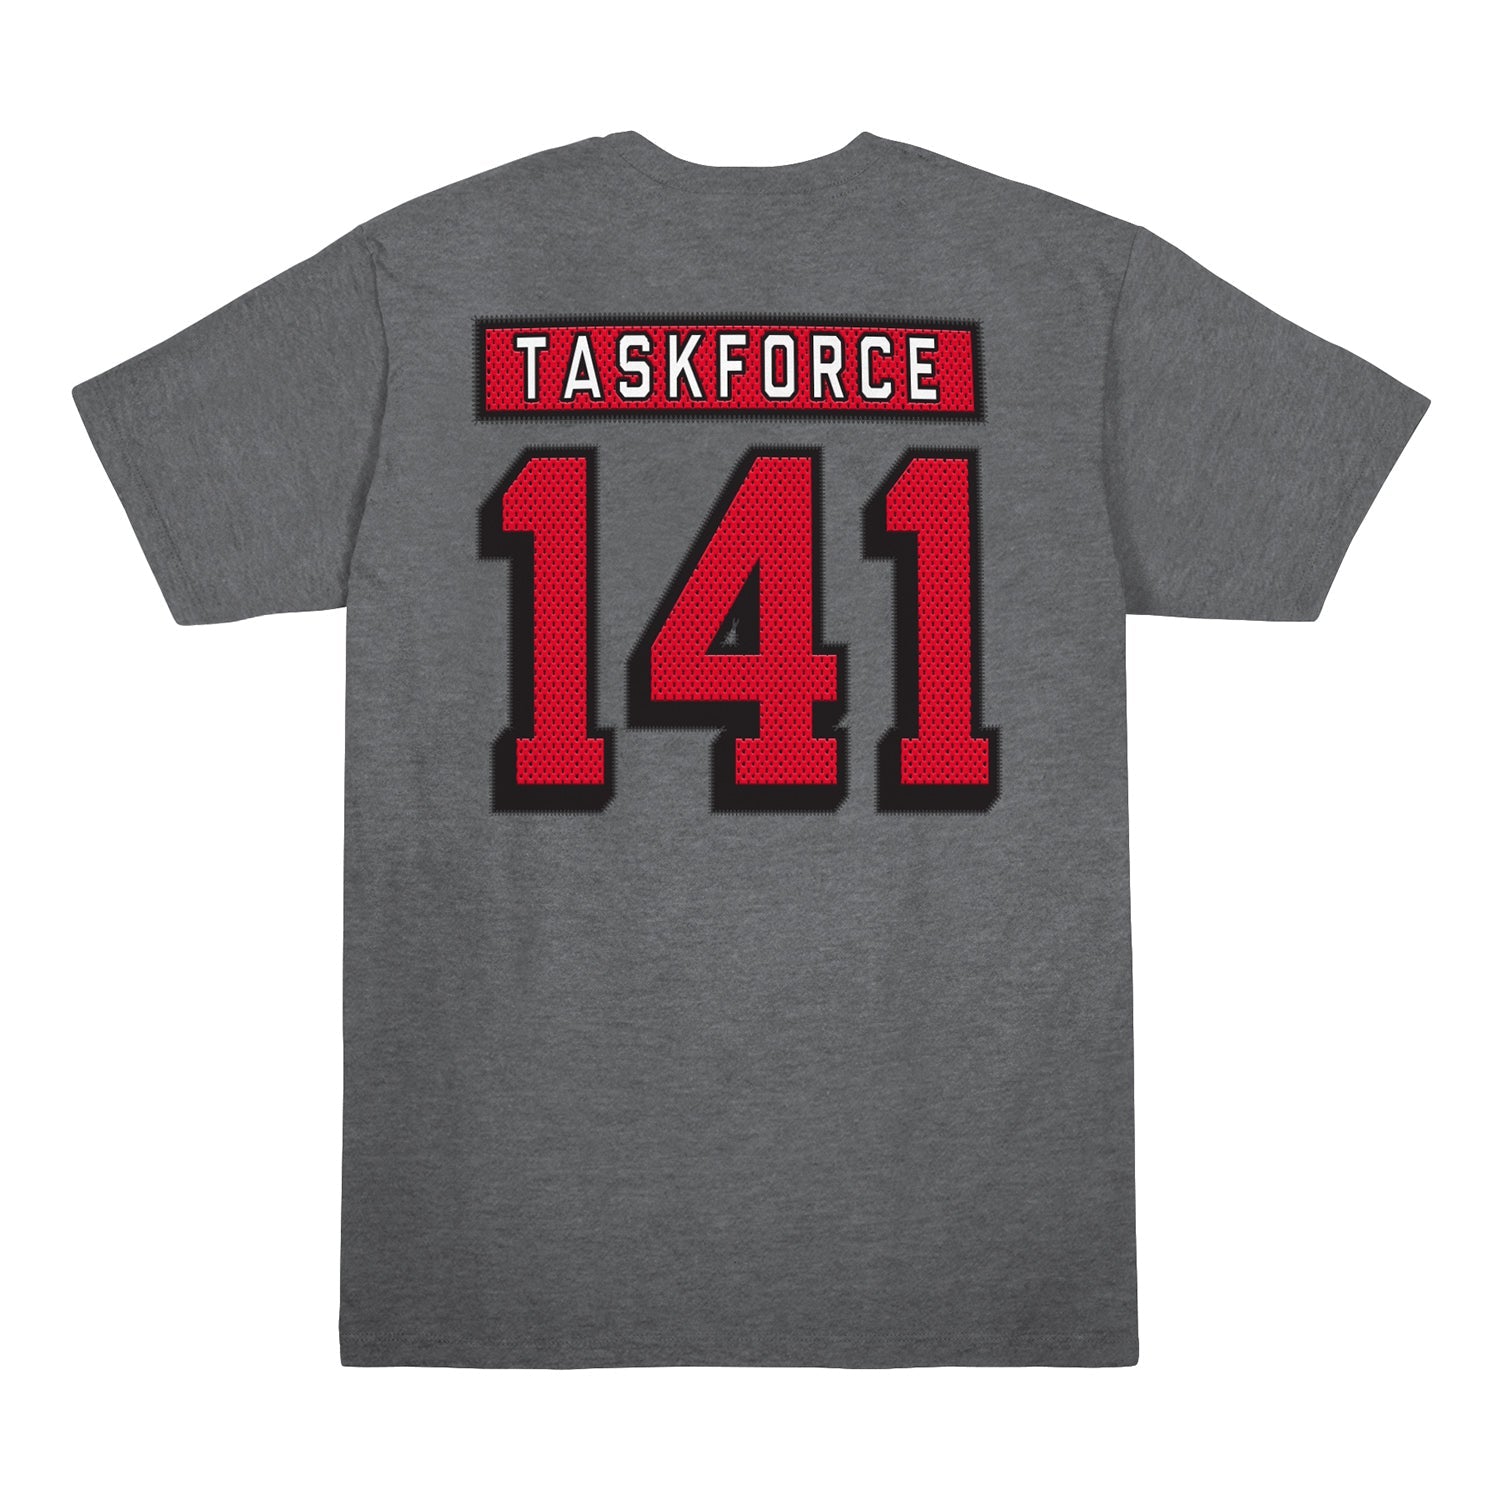 Call of Duty Hockey Task Force 141 Grey T-Shirt - Back View